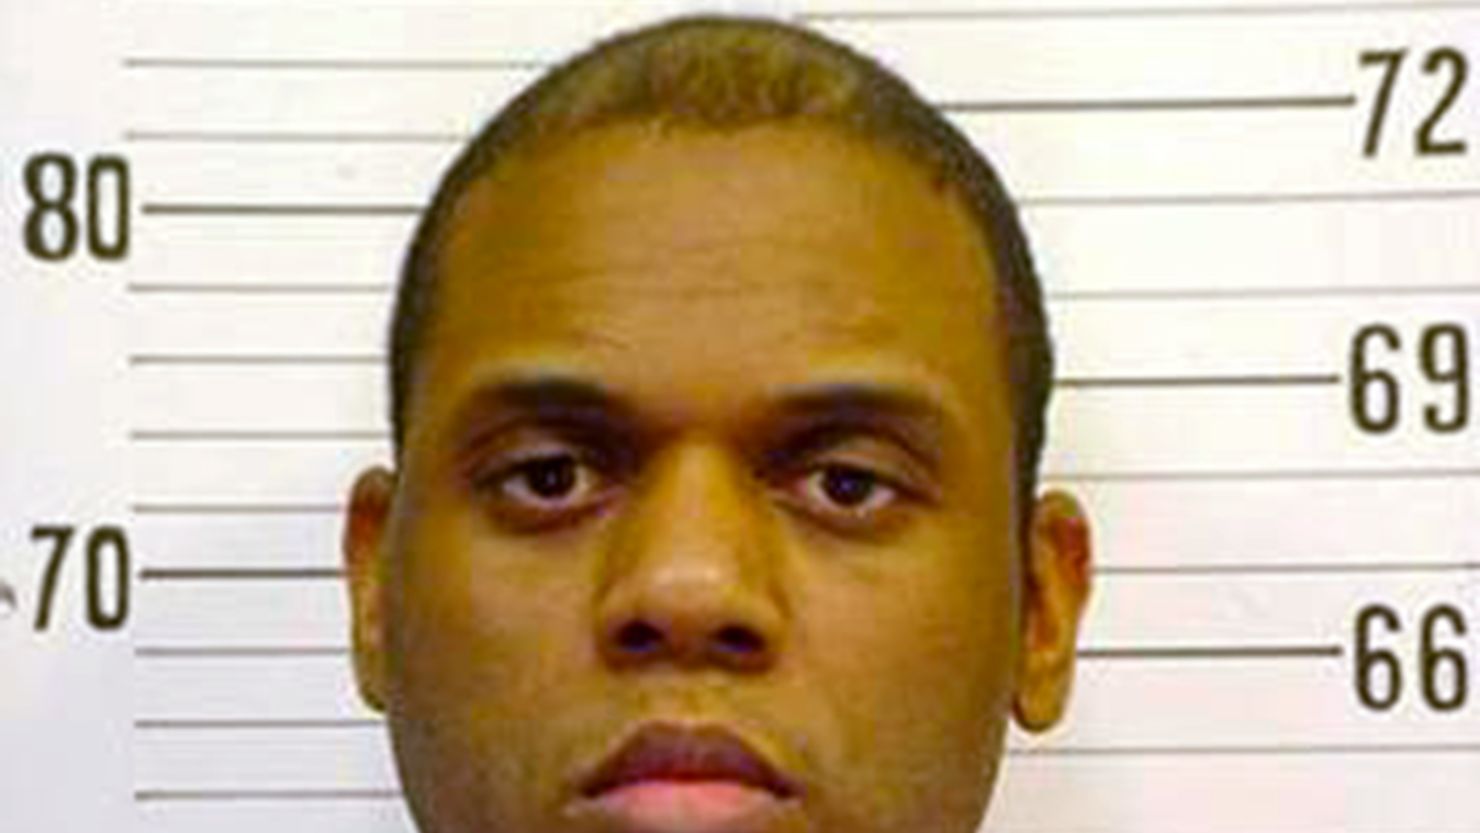  William Darelle Smith was charged with the 2007 shooting death of Zurisaday Villanueva.